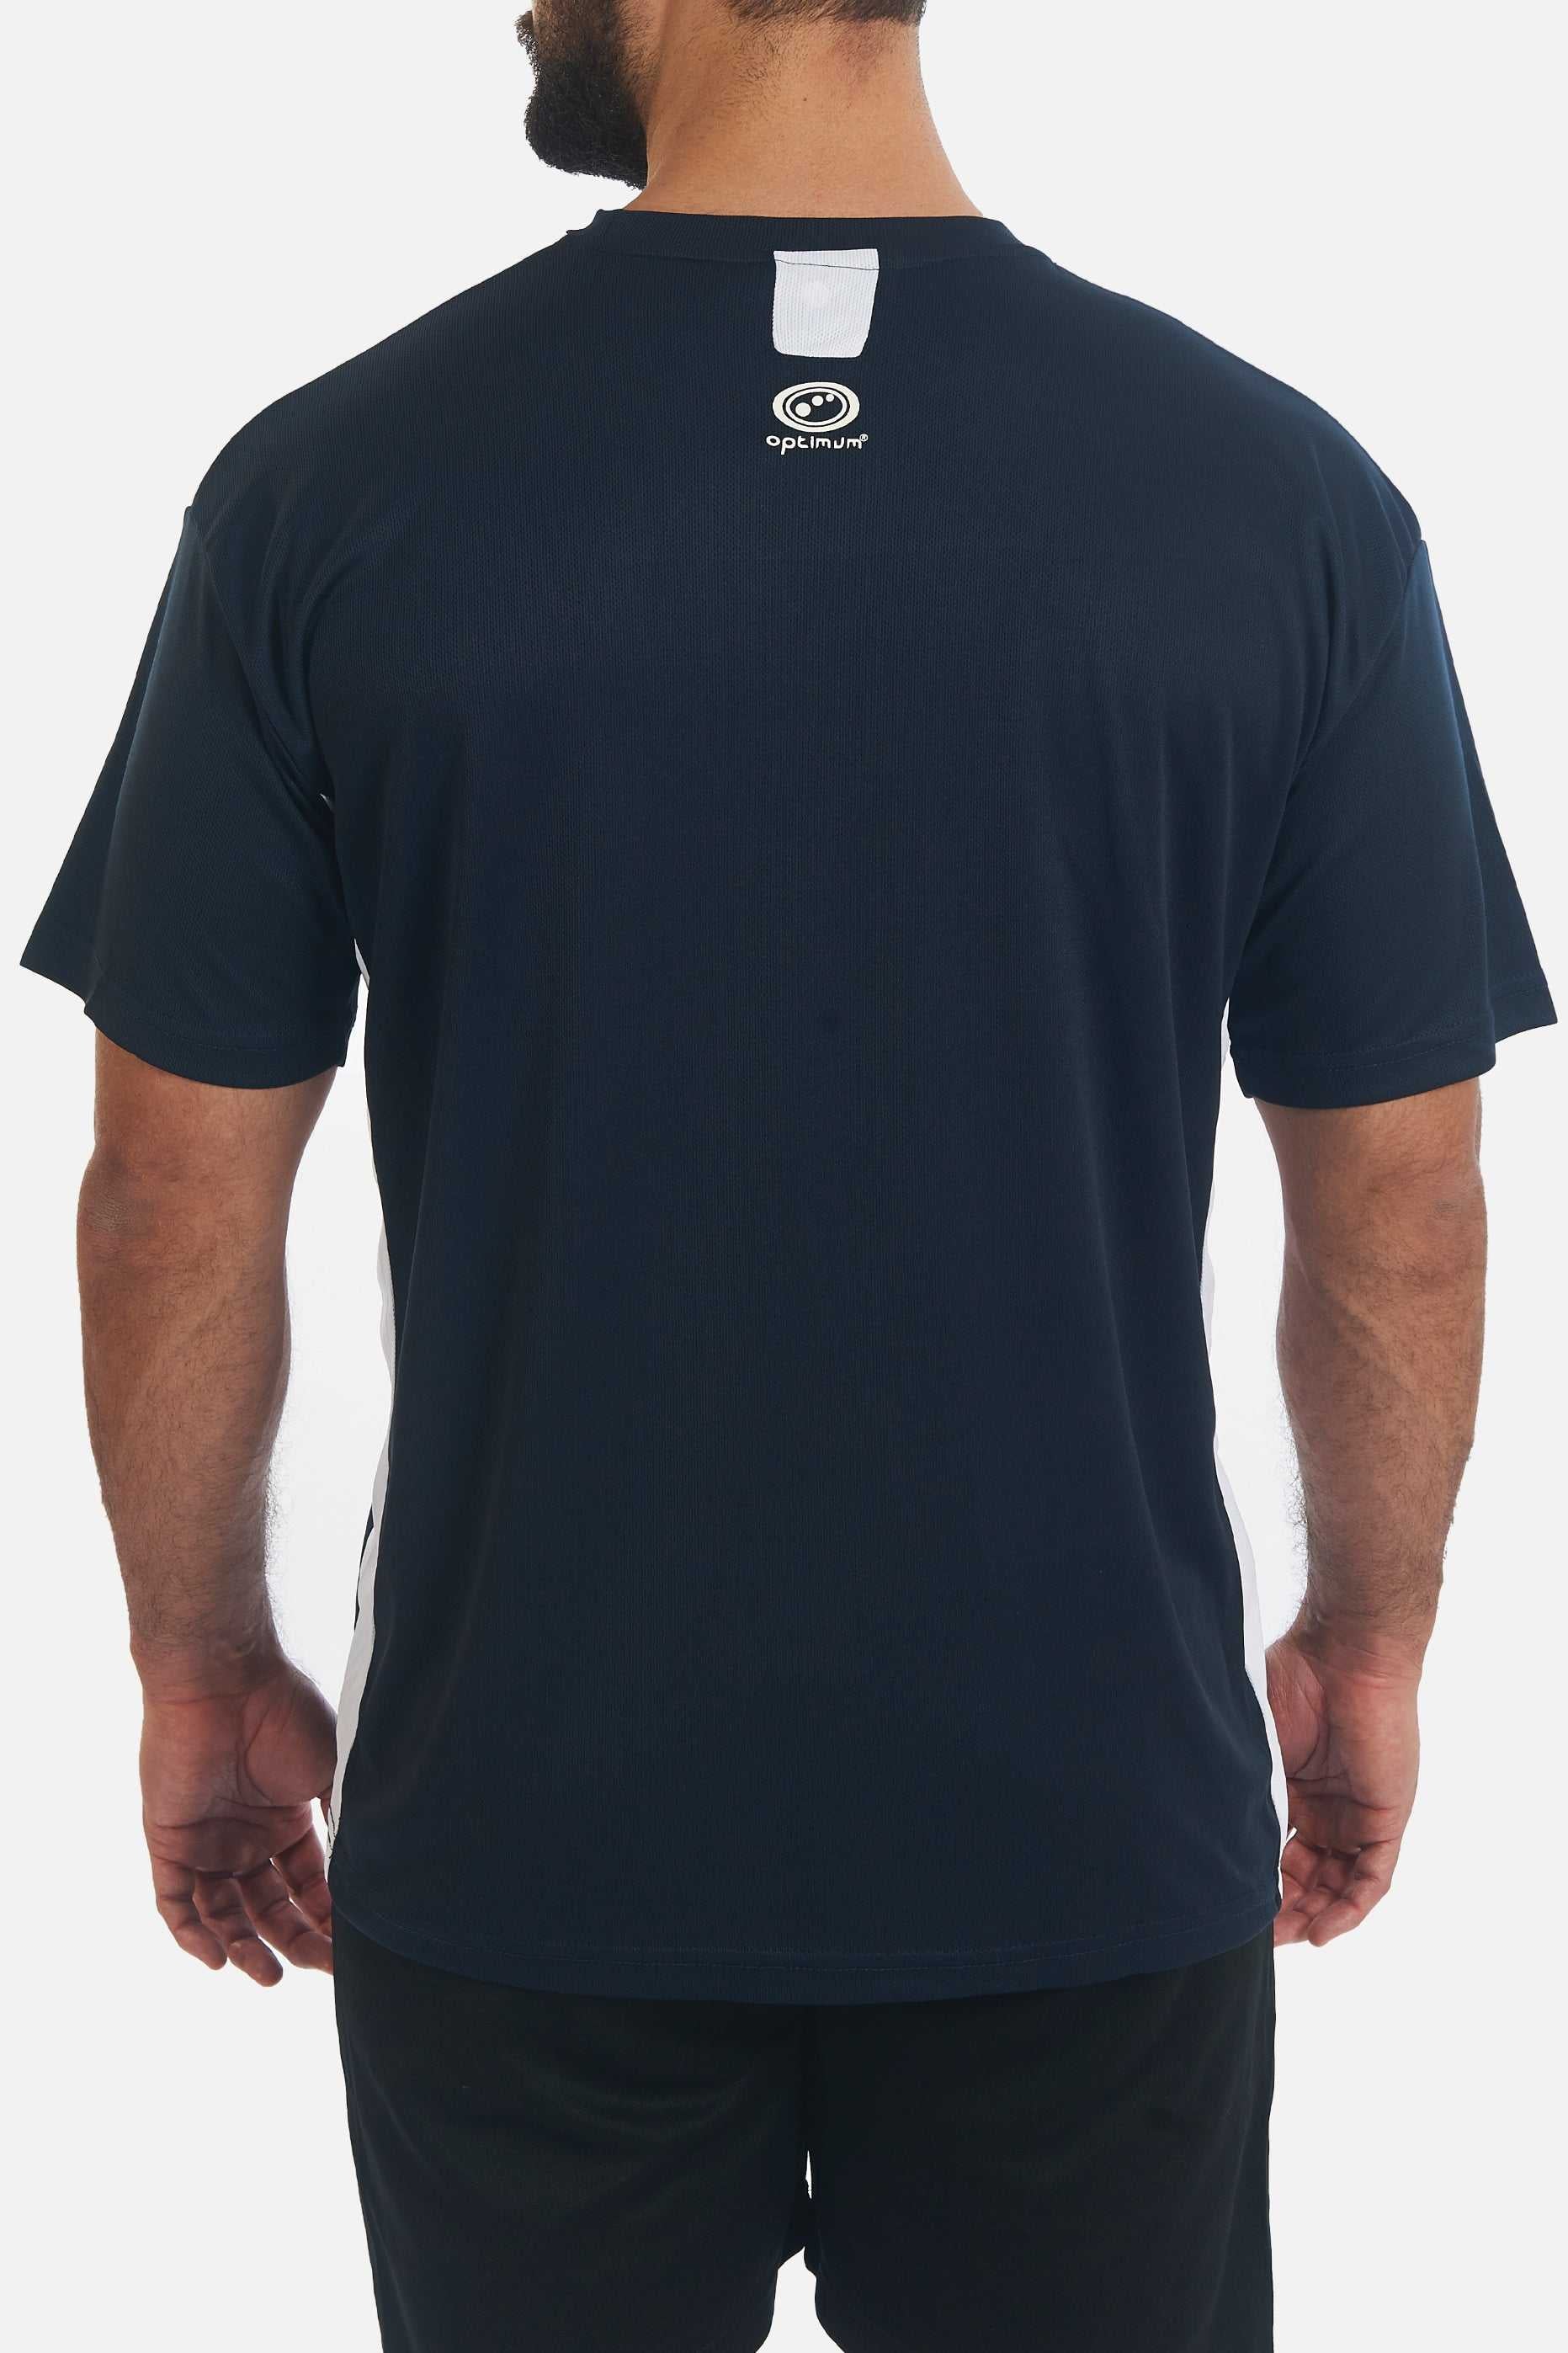 Tempo T-Shirt Navy Discount Products